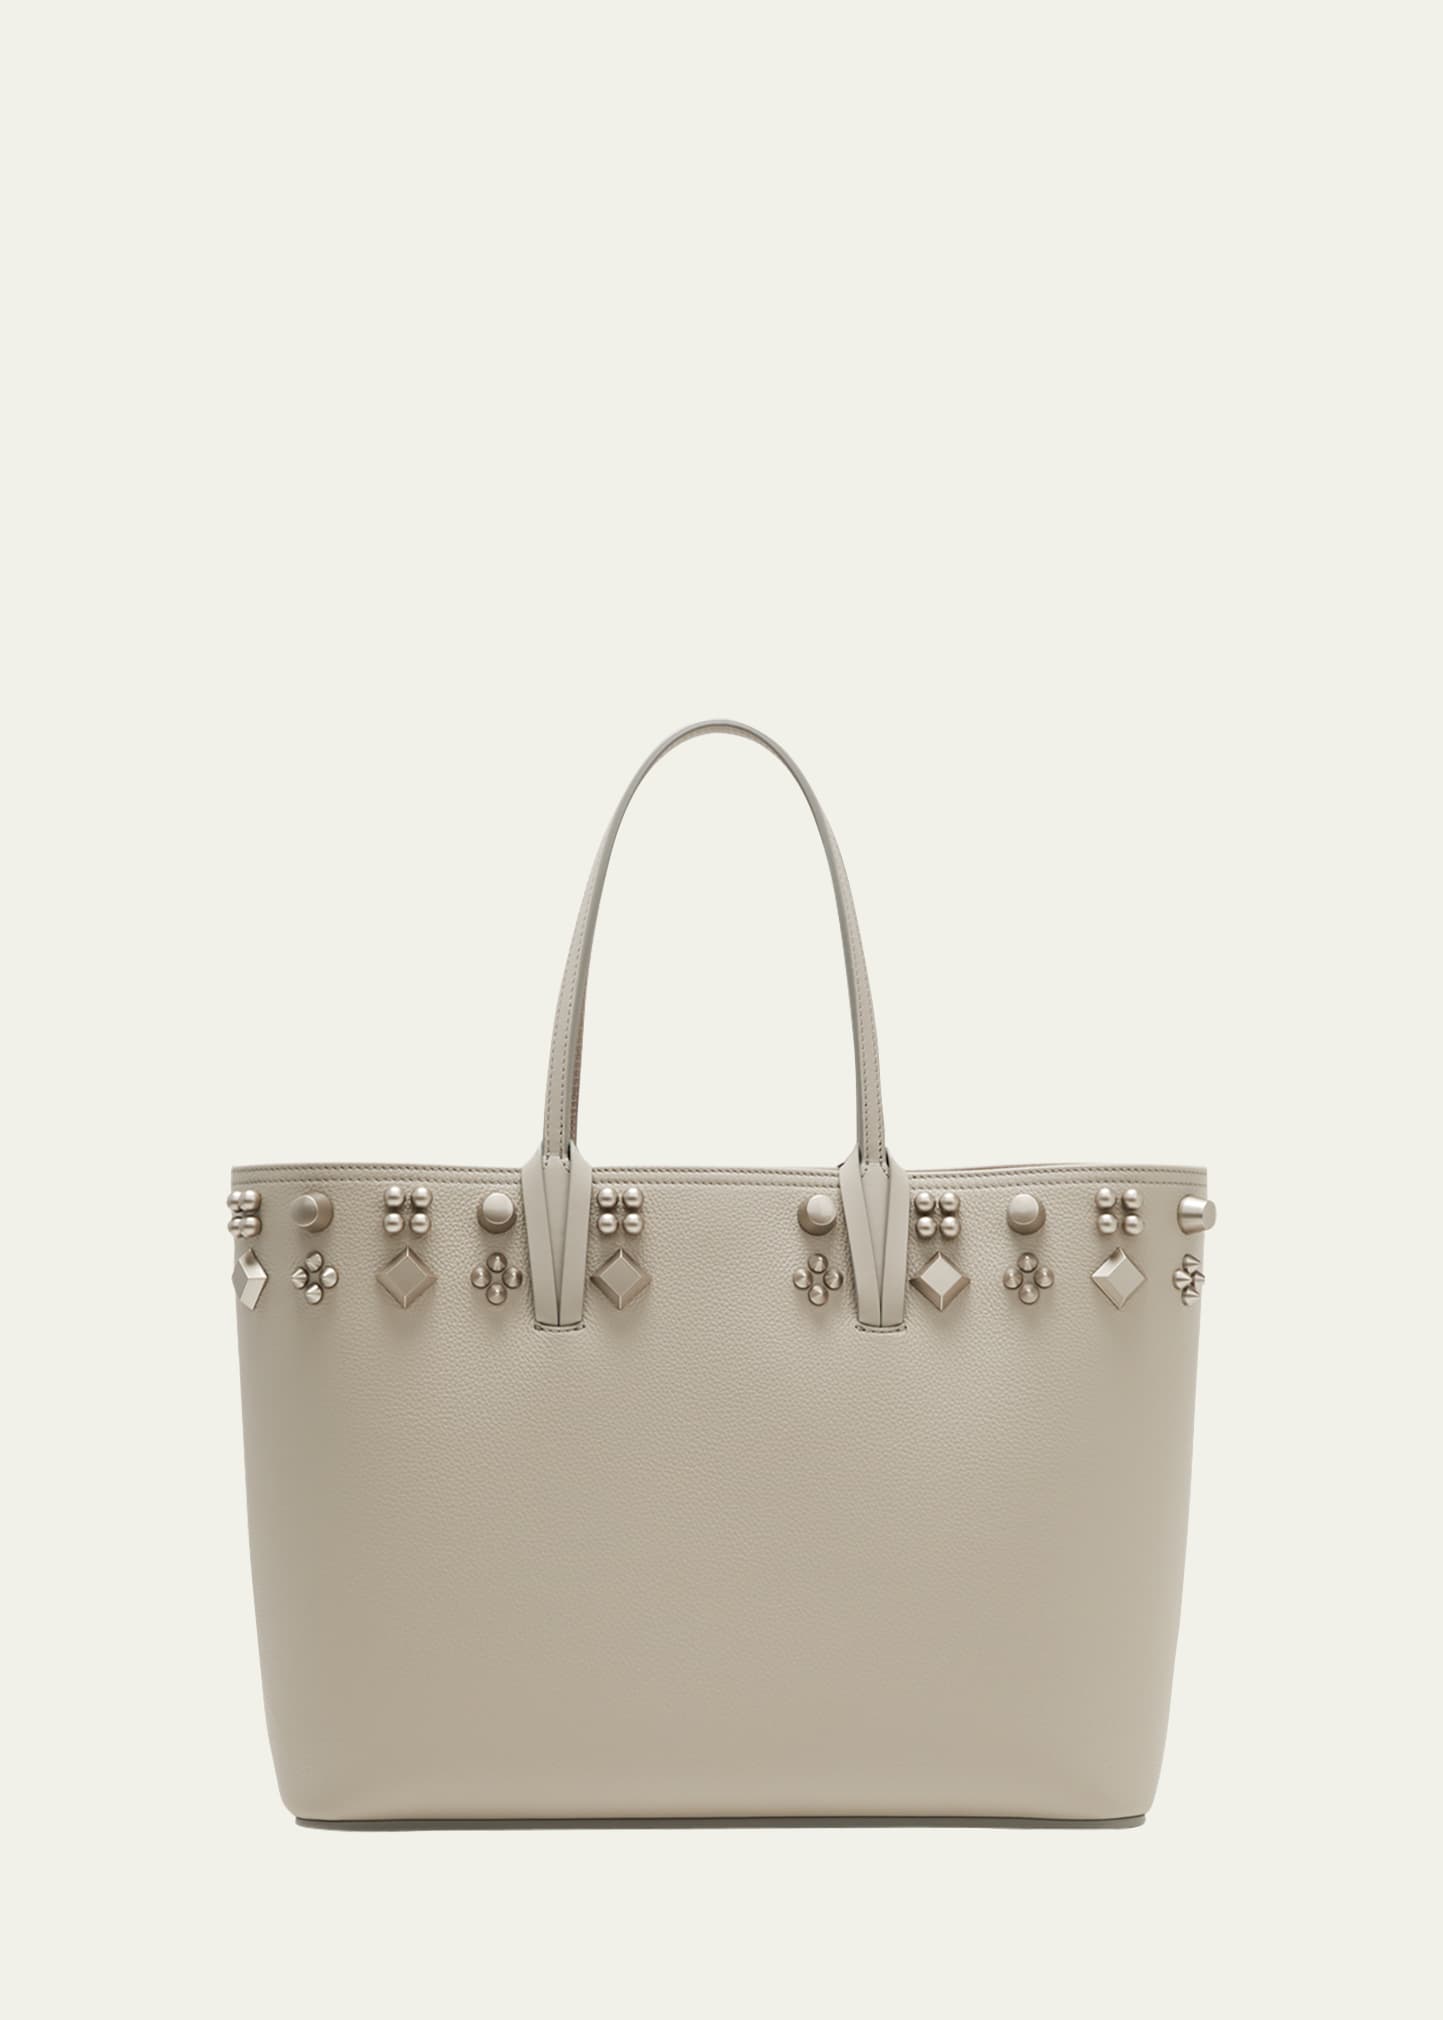 Christian Louboutin Cabata Empire Spike Studded Leather Tote Bag In Goose